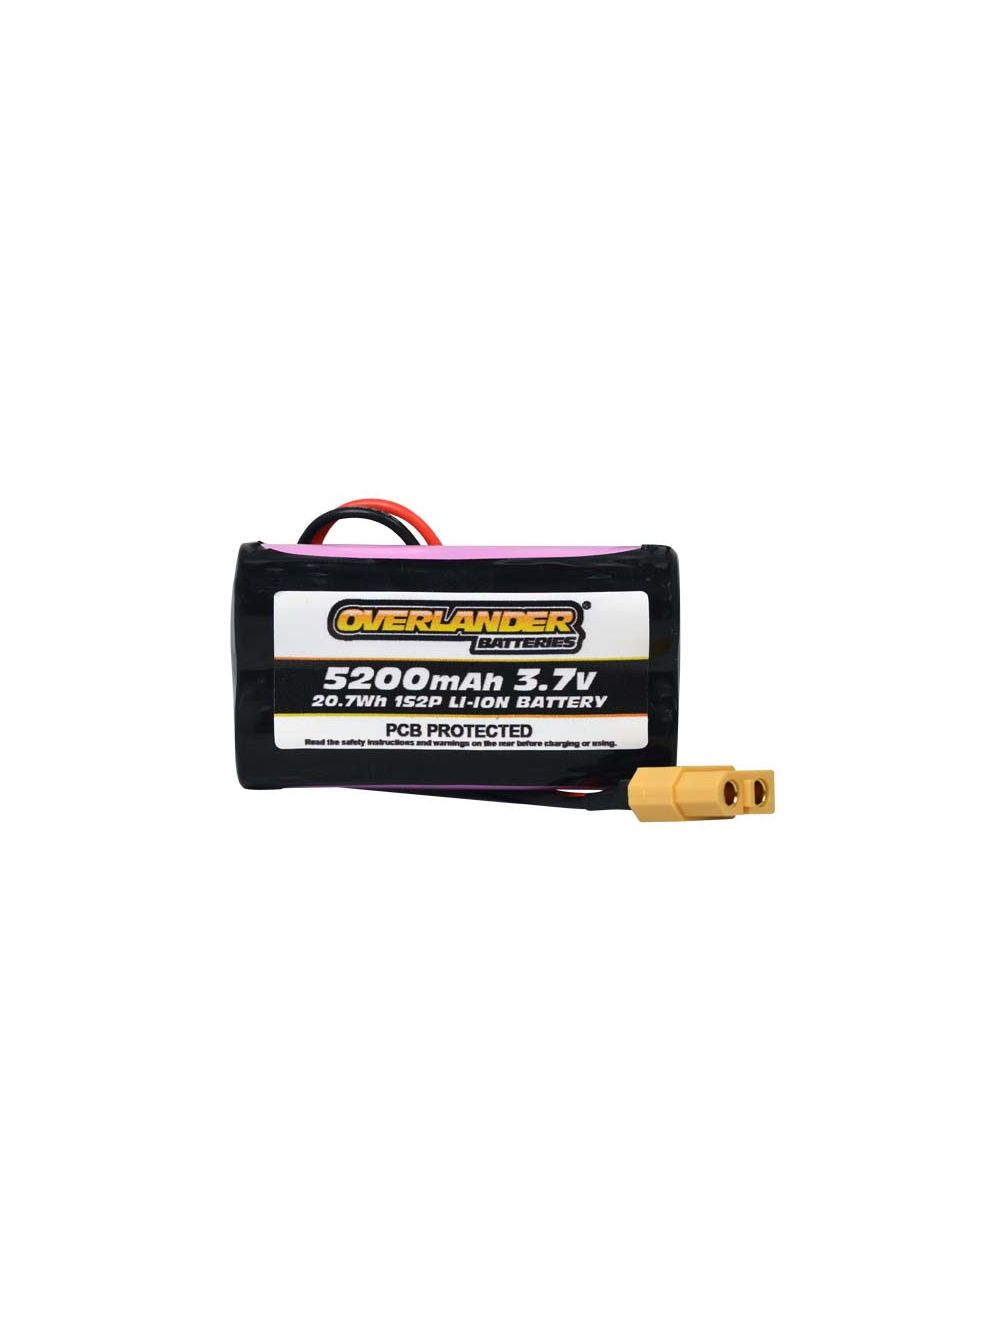 Overlander 5200mAh 1S2P 3.7V Li-Ion Rechargeable Battery with PCB 3304